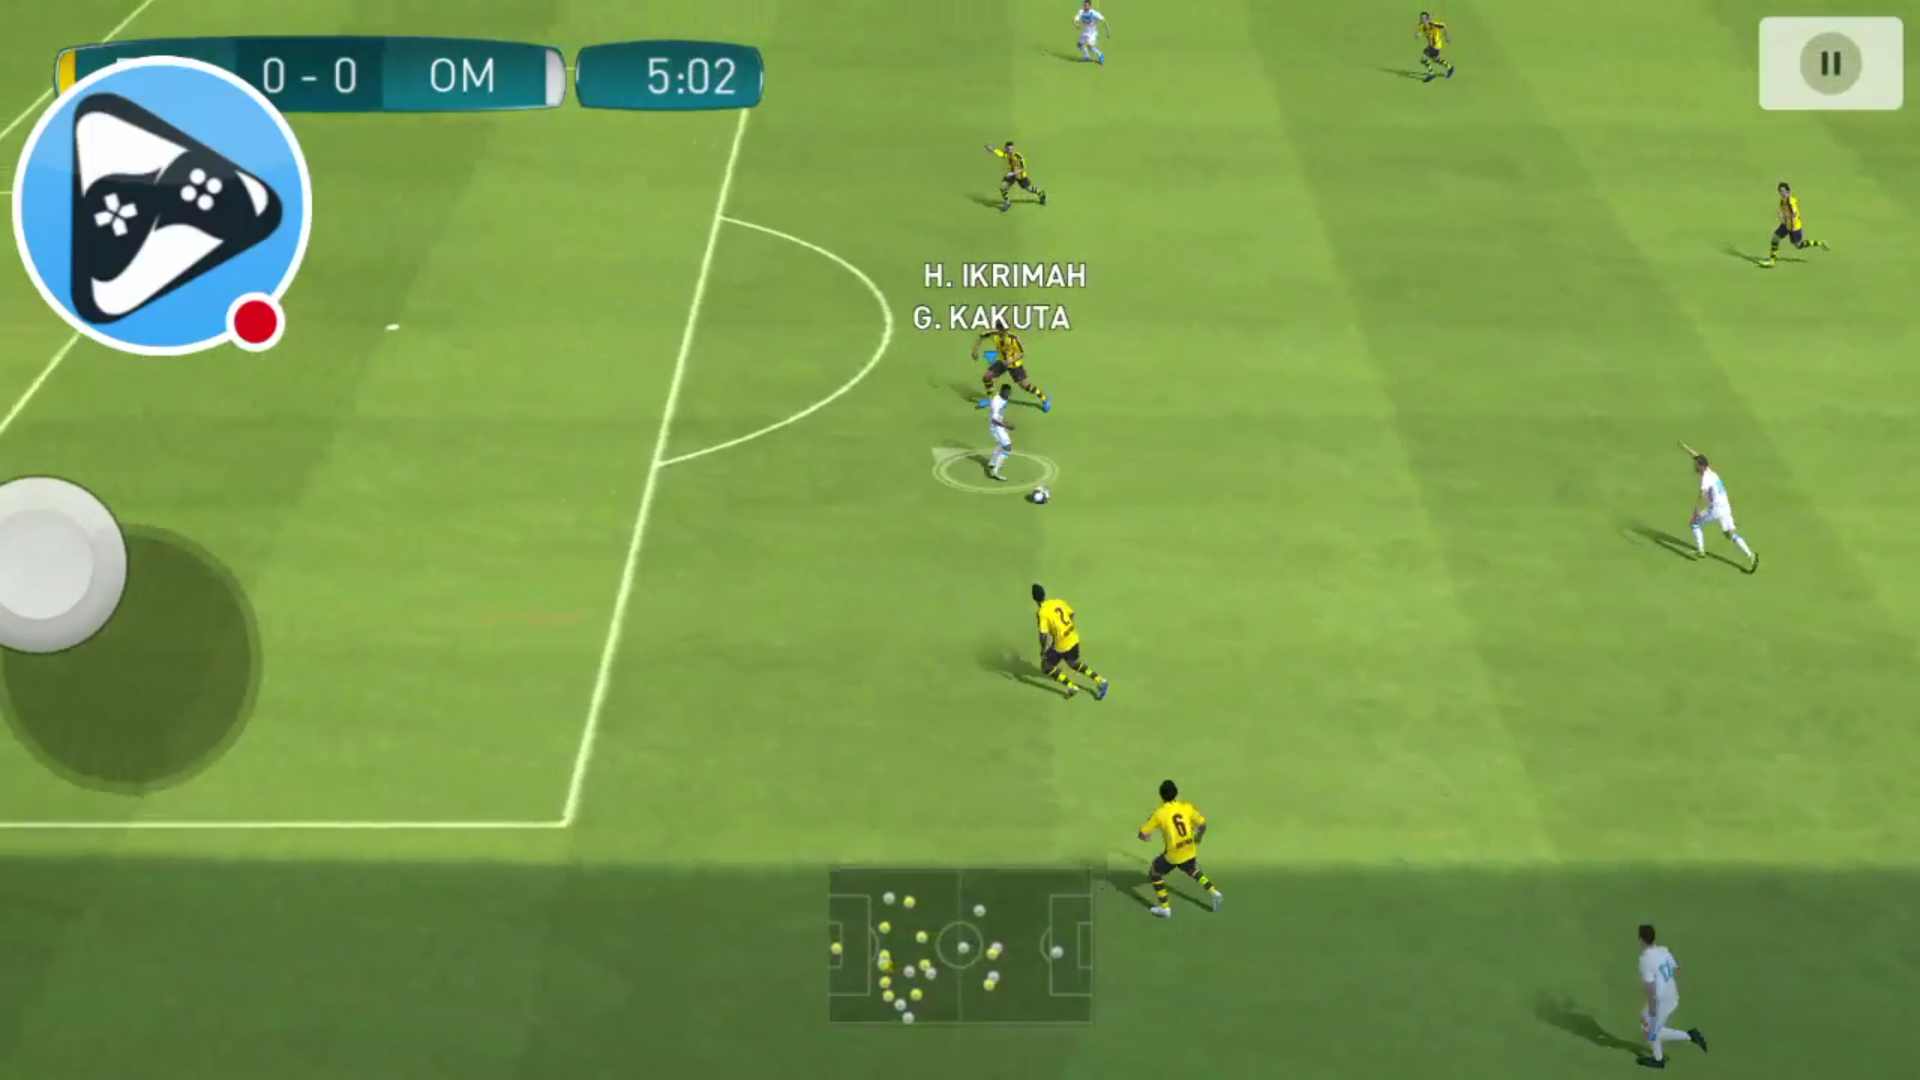 PES 2017 Mobile for Android now available in some countries